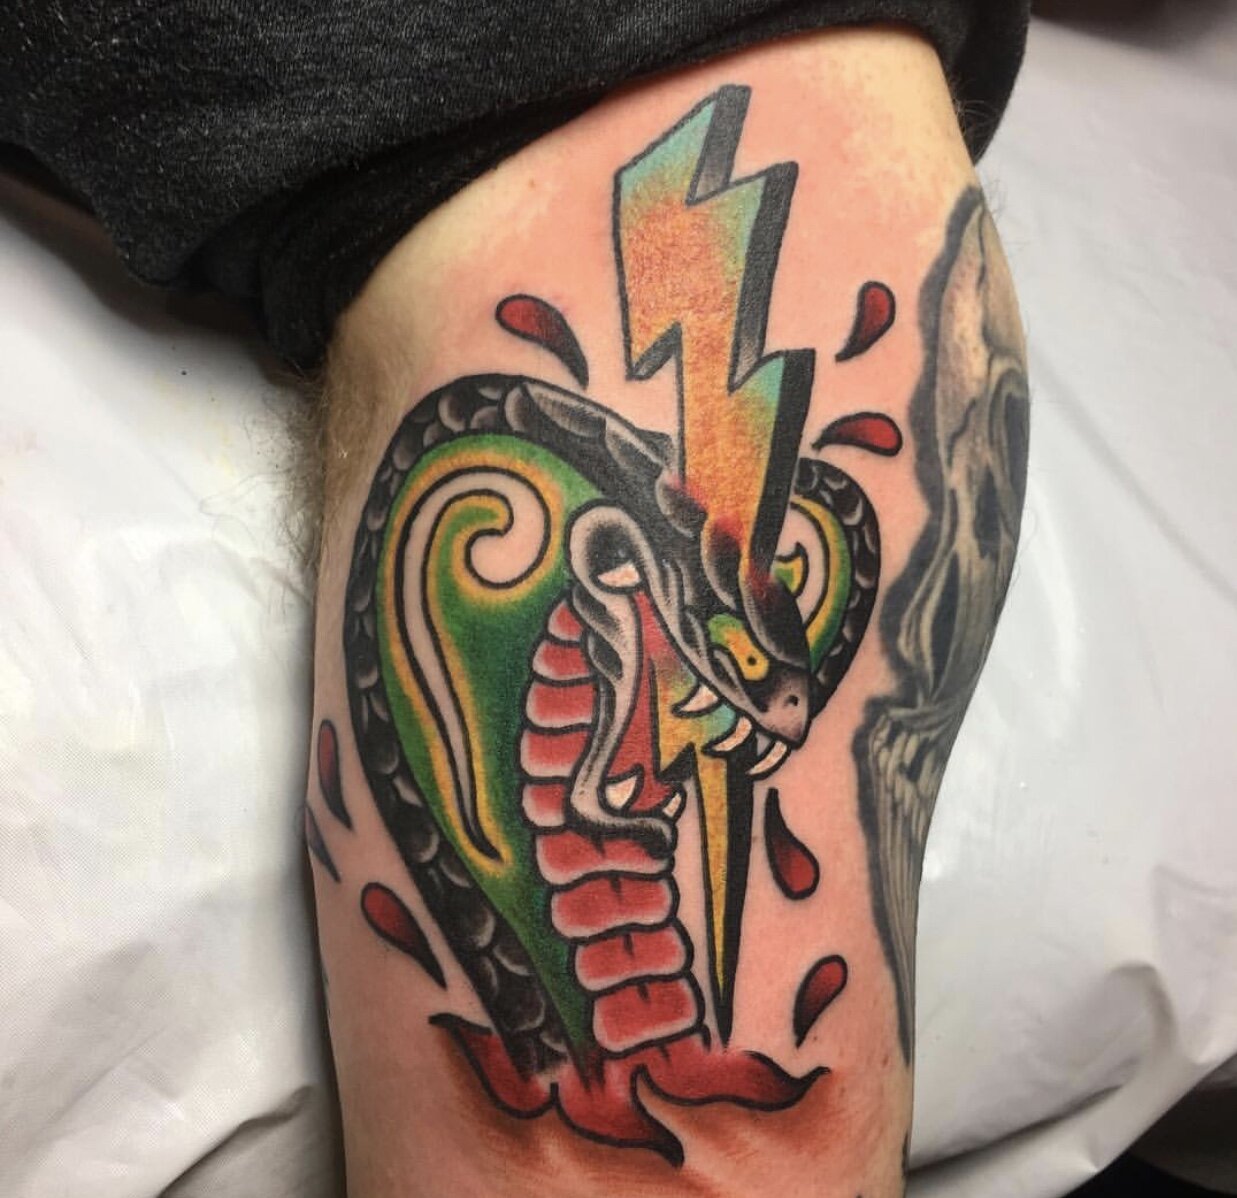 Corba snake tattoo with lighting bolt by Andrew Patch at Southern Star Tattoo in Atlanta, Georgia.